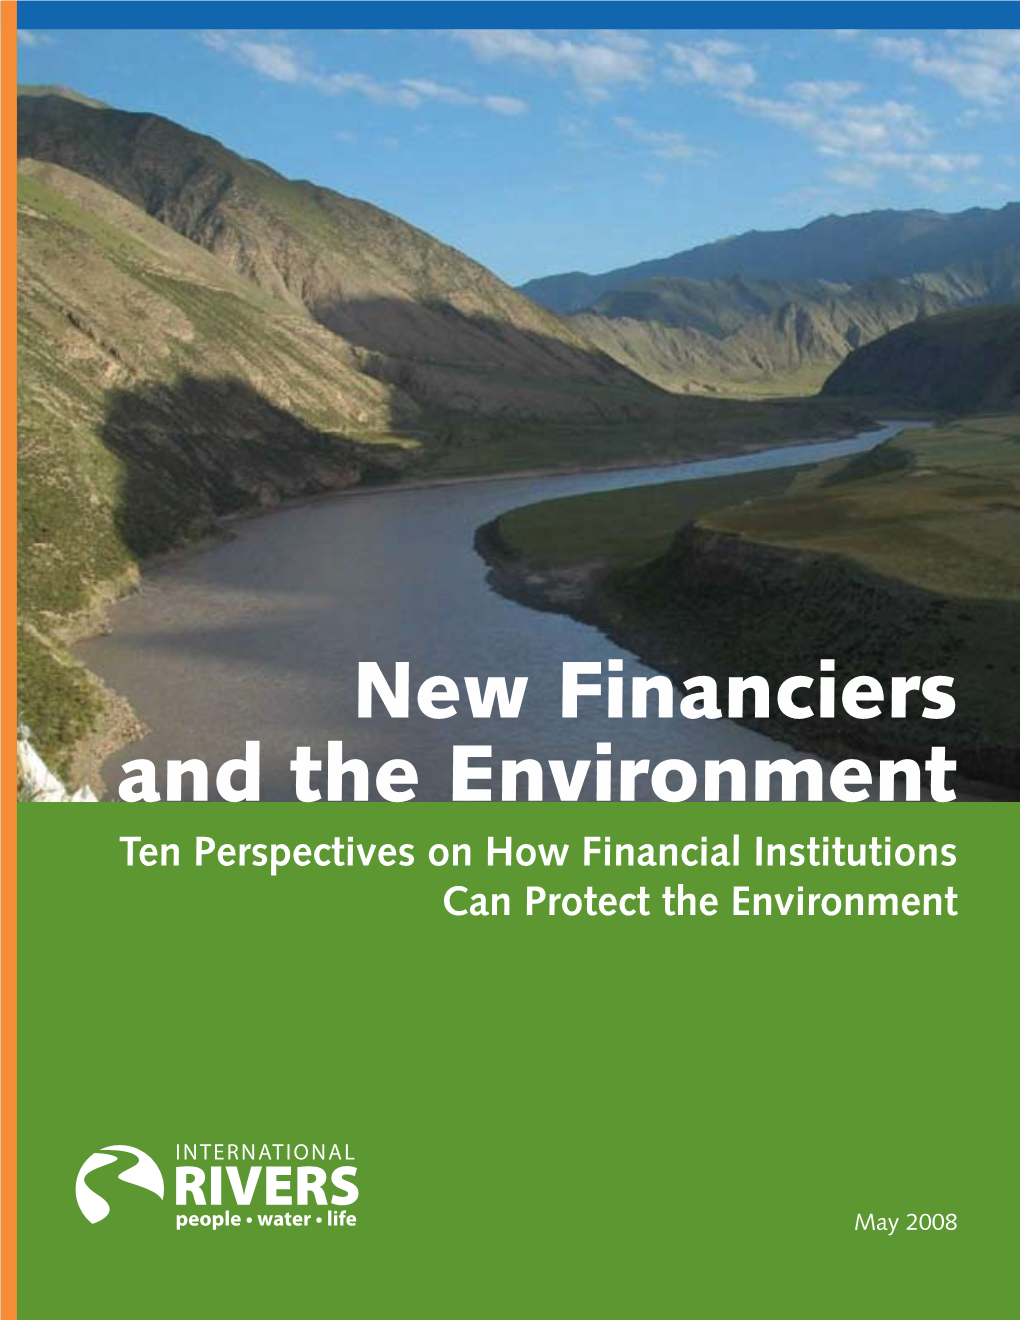 Ngo Documents 2008-05-14 00:00:00 New Financiers and The